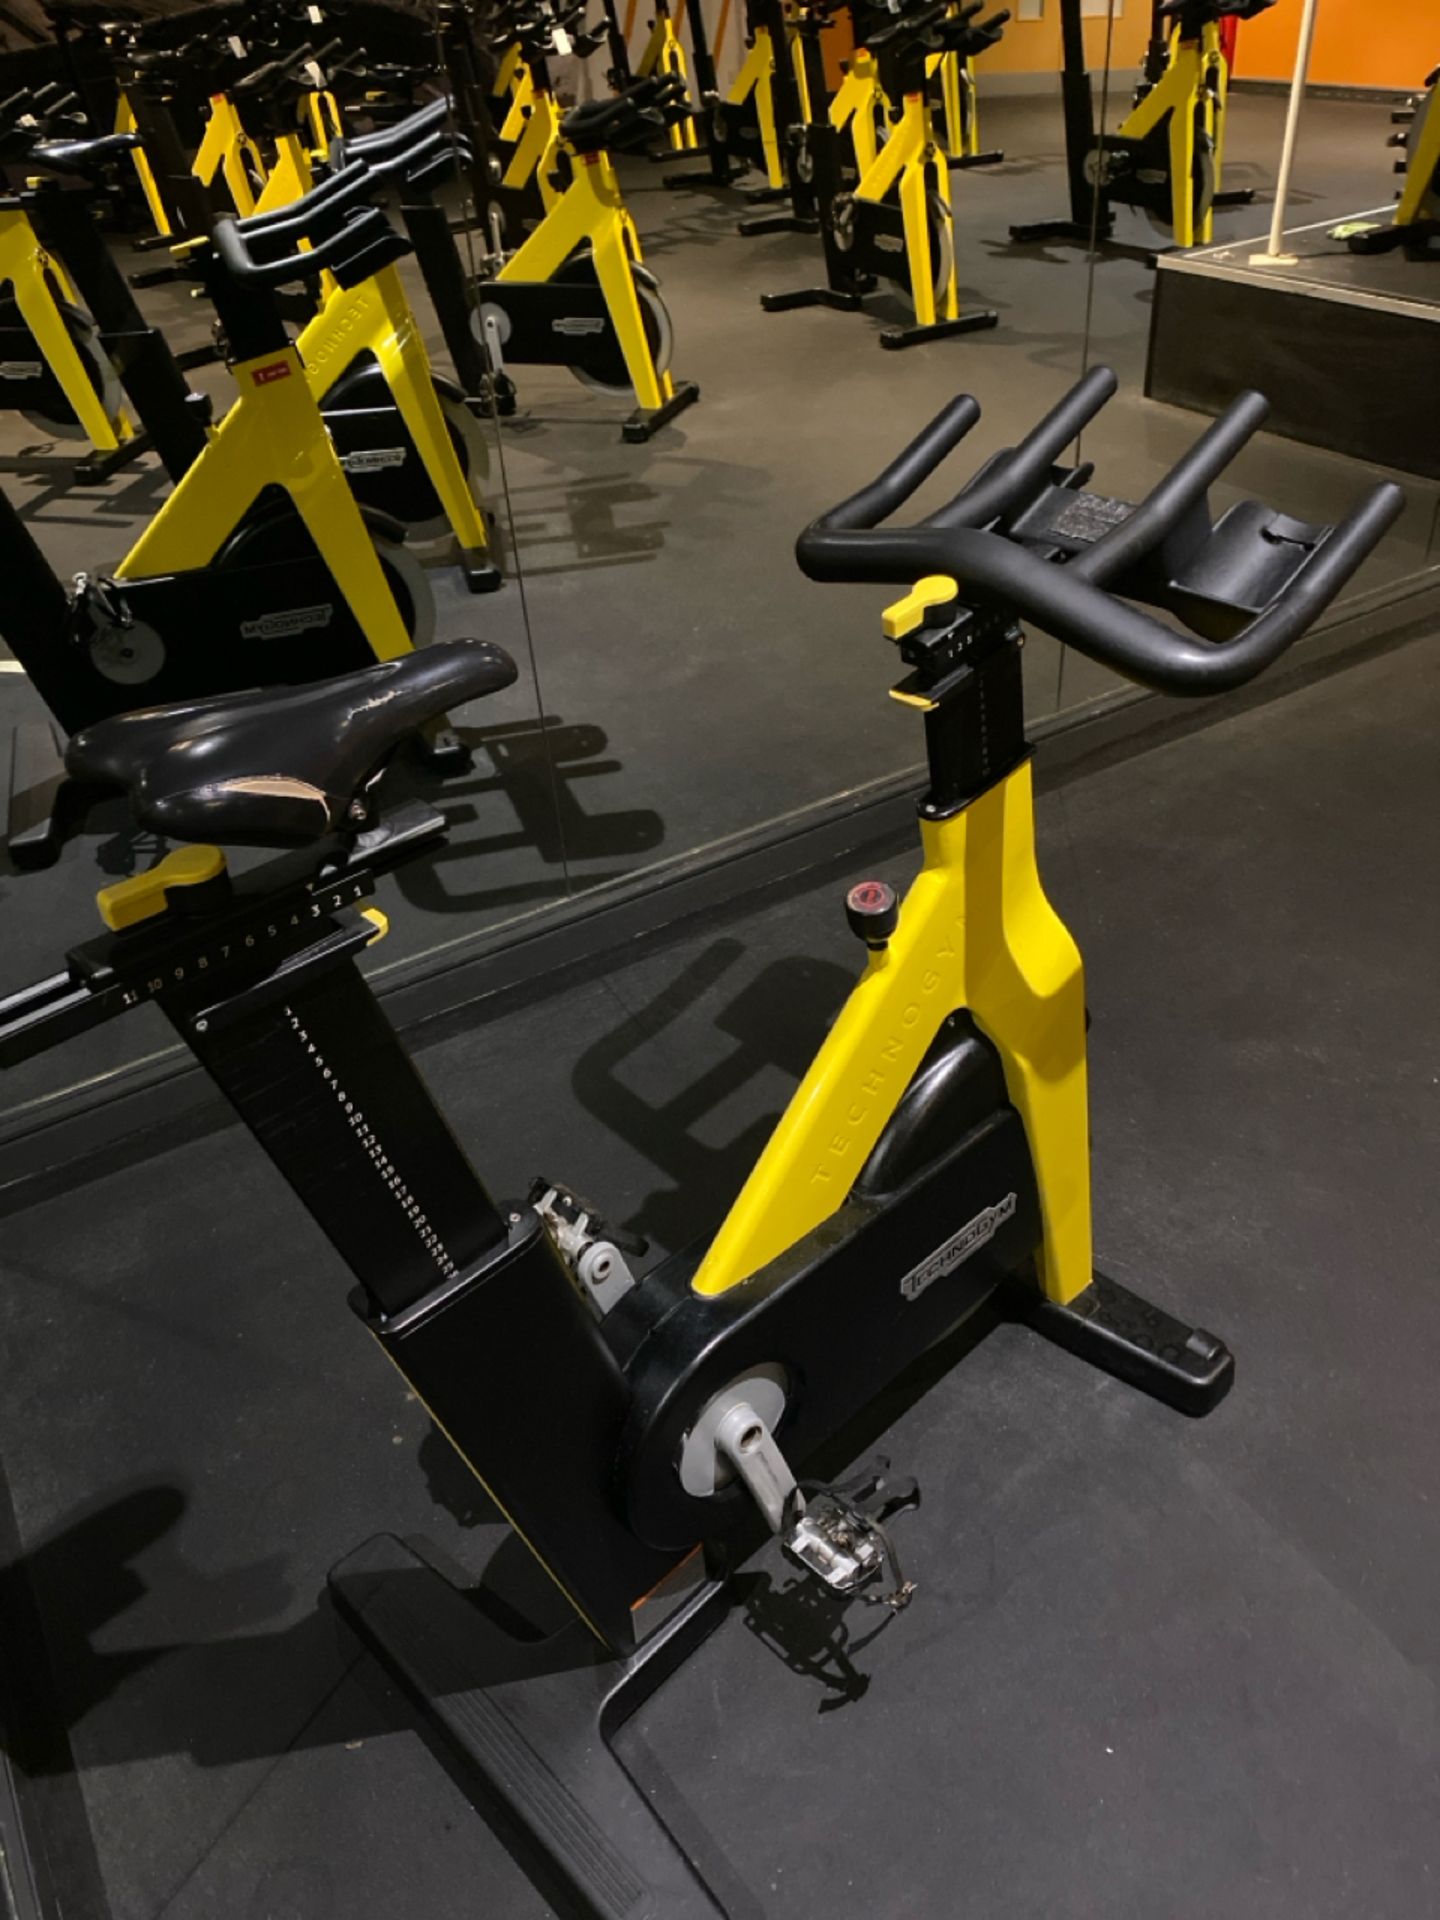 Technogym Group Cycle Ride Spin Bike - Image 7 of 10